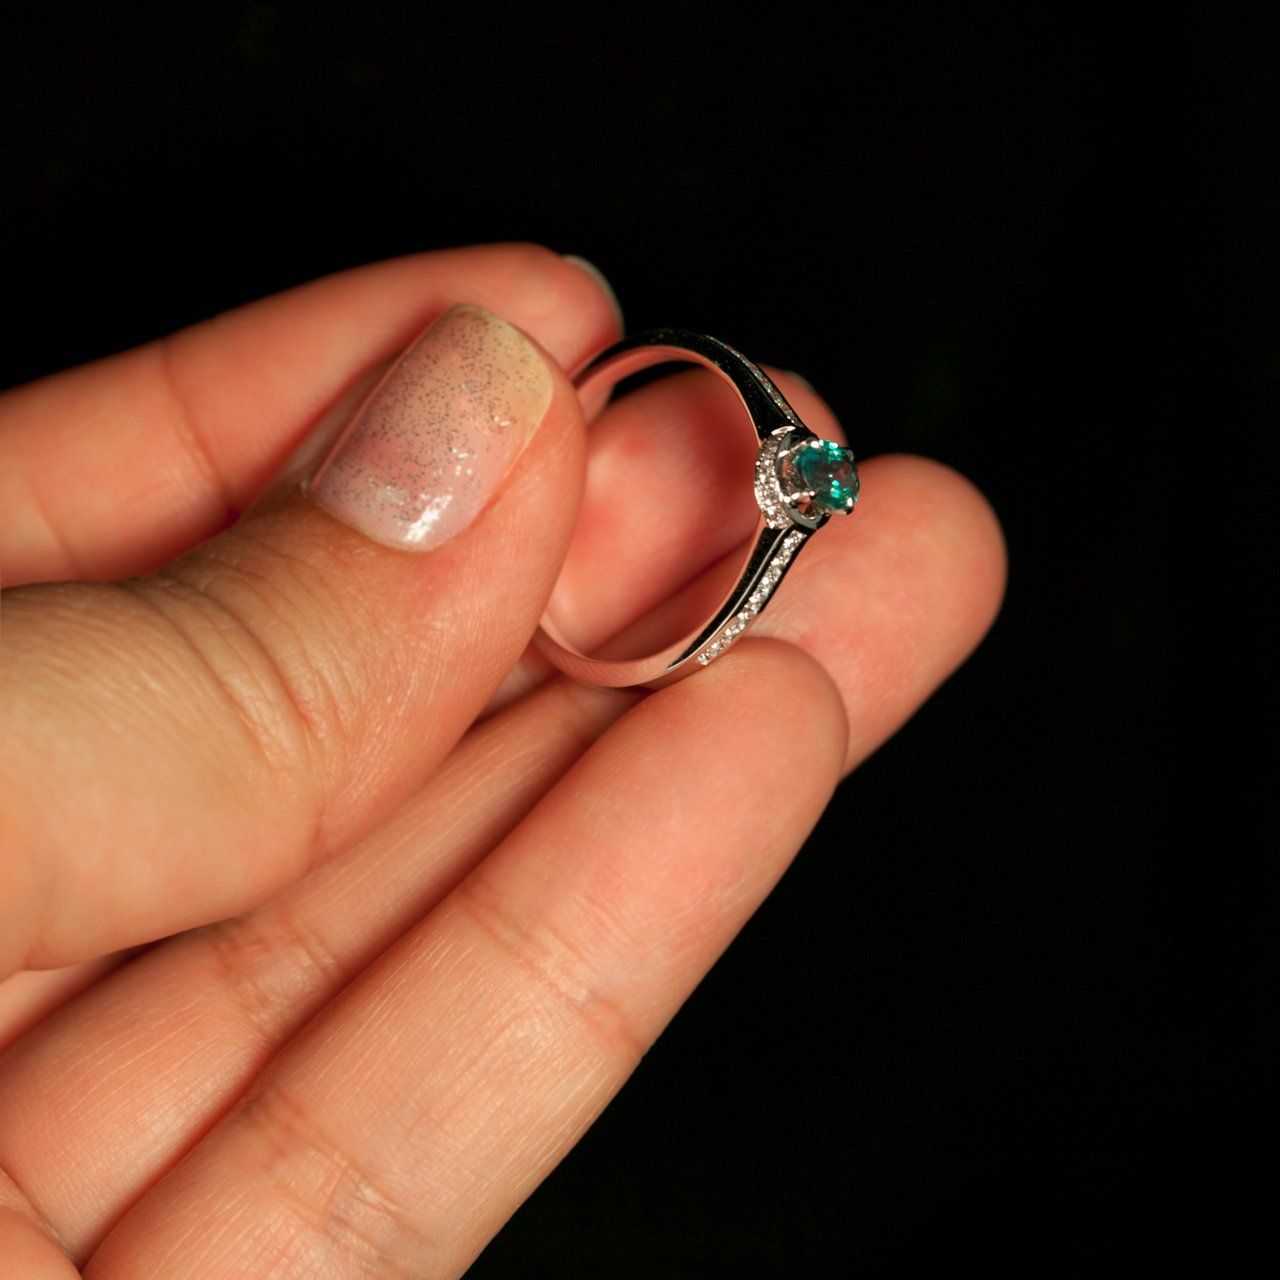 Hand showcasing a 0.55ct blue to green color-changing alexandrite ring in 18k white gold